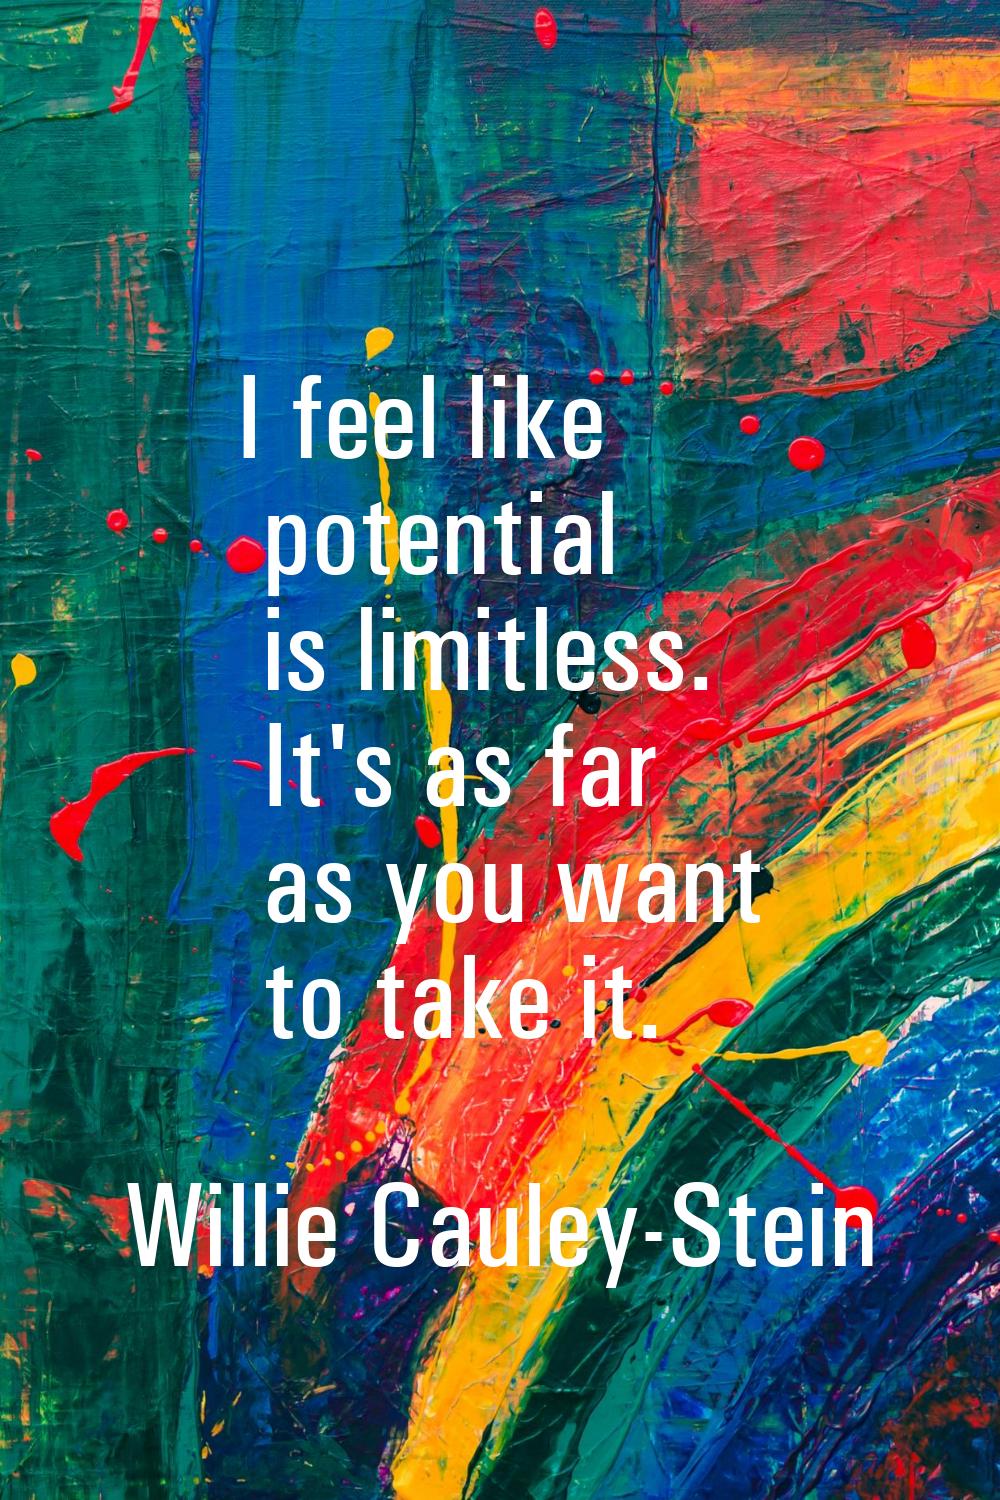 I feel like potential is limitless. It's as far as you want to take it.